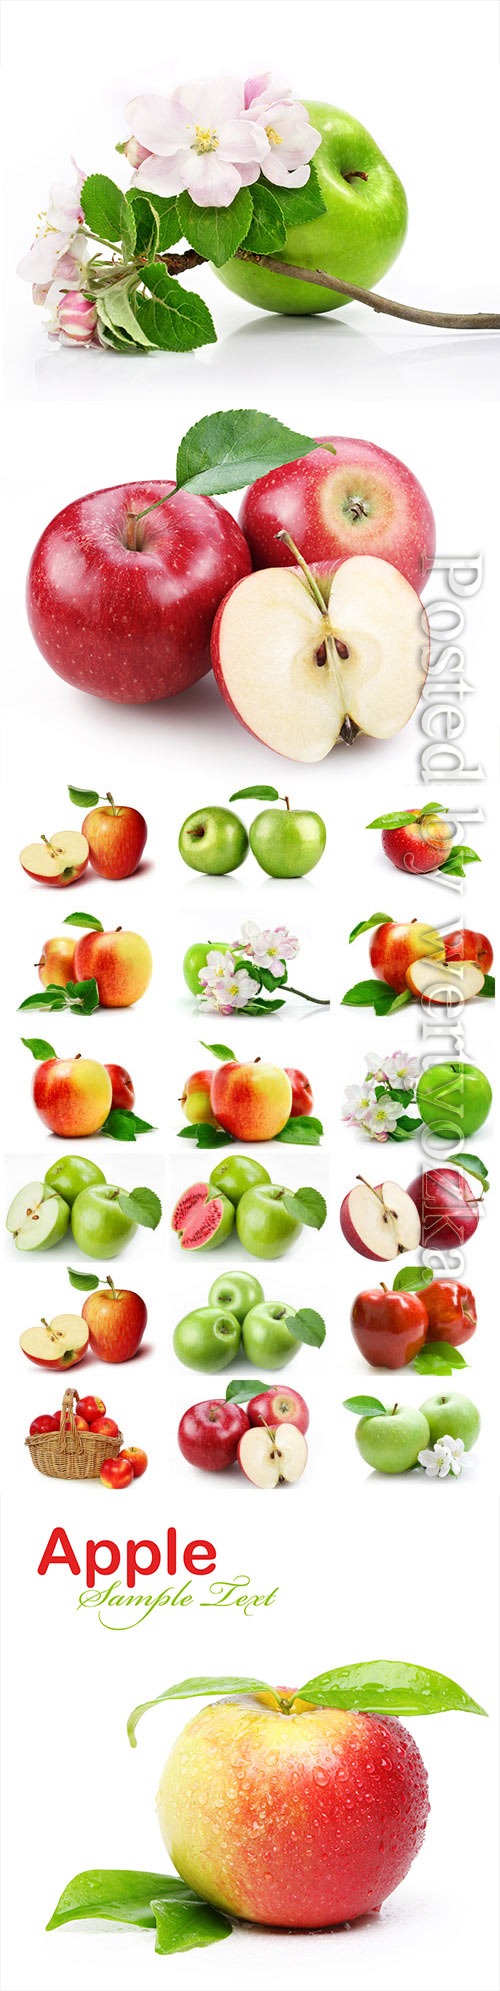 Red and green apples and apple blossom stock photo